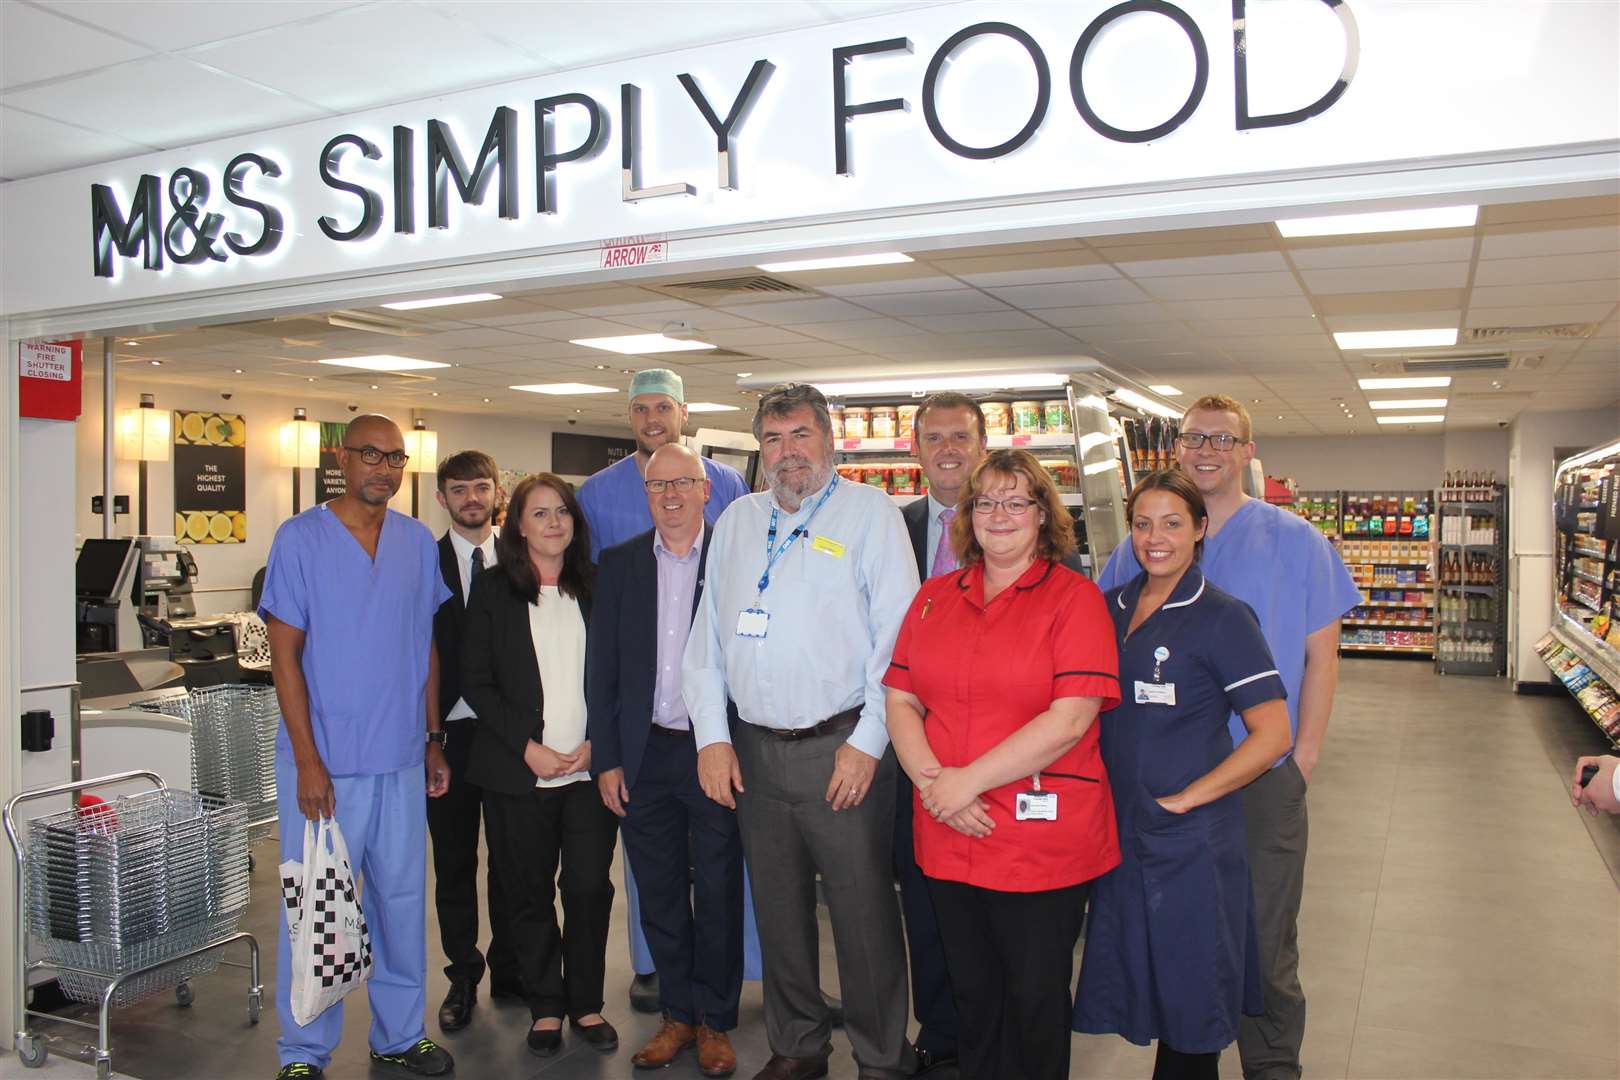 The new Marks and Spencer food store has opened at Maidstone Hospital